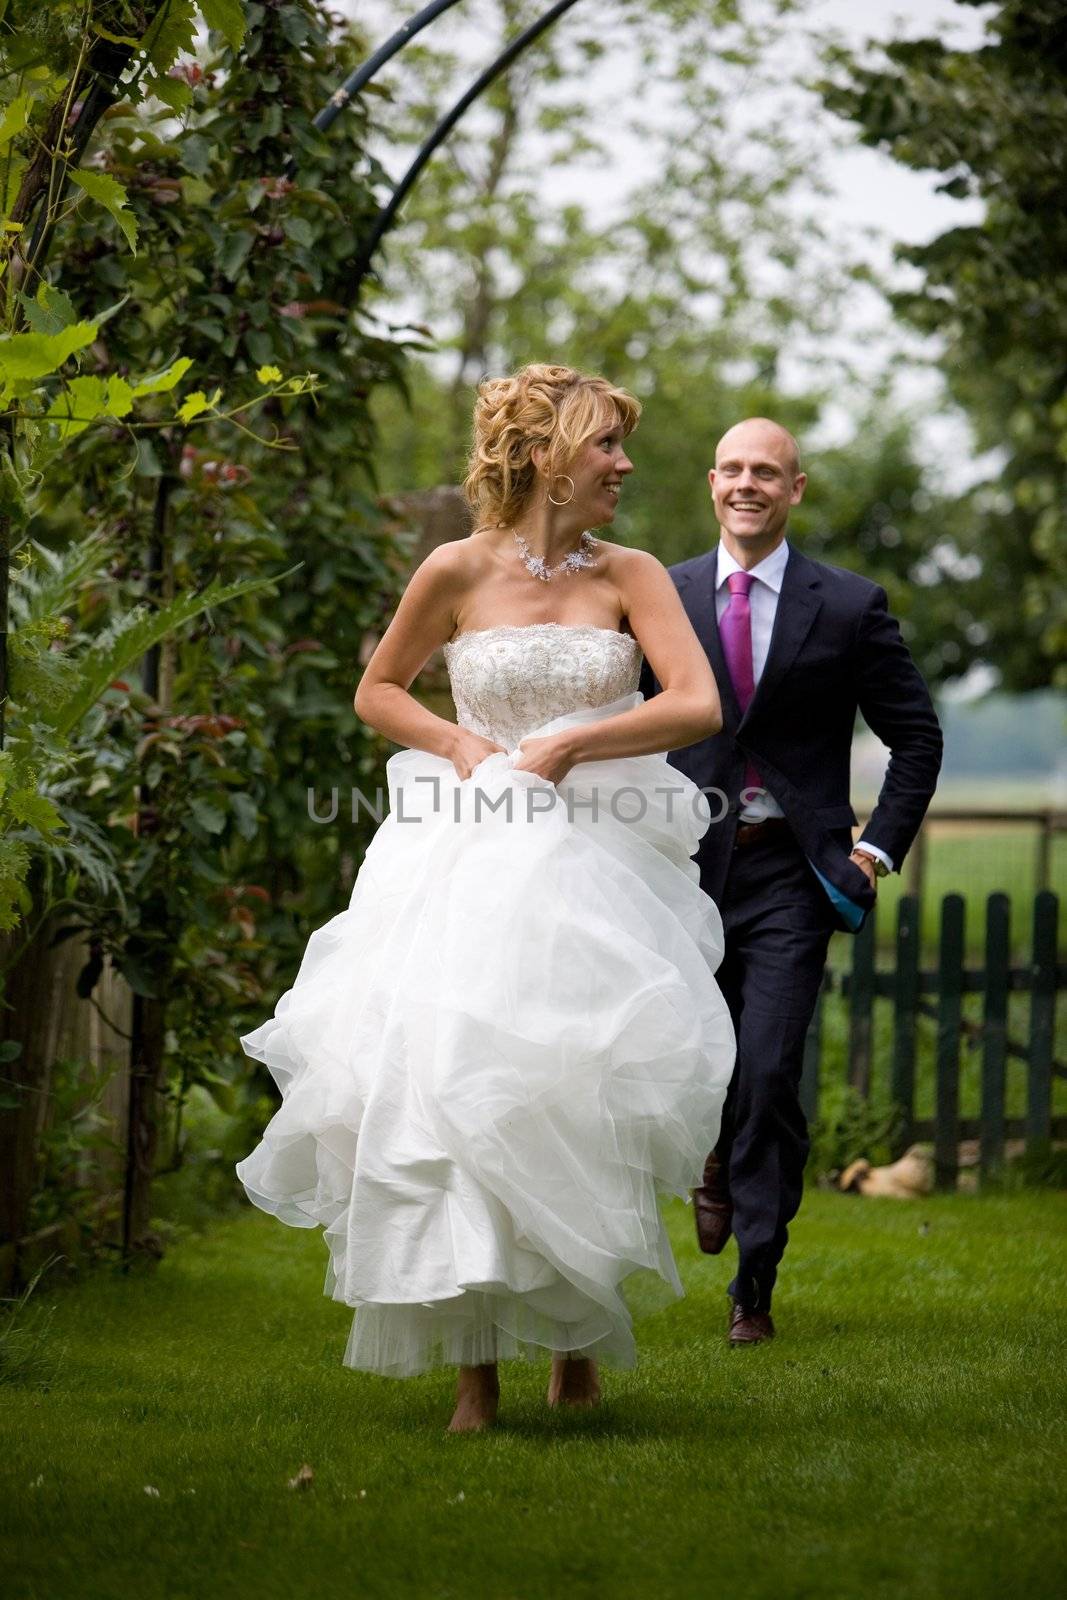 Beautiful bride running away from her new husband on barefeet through the grass